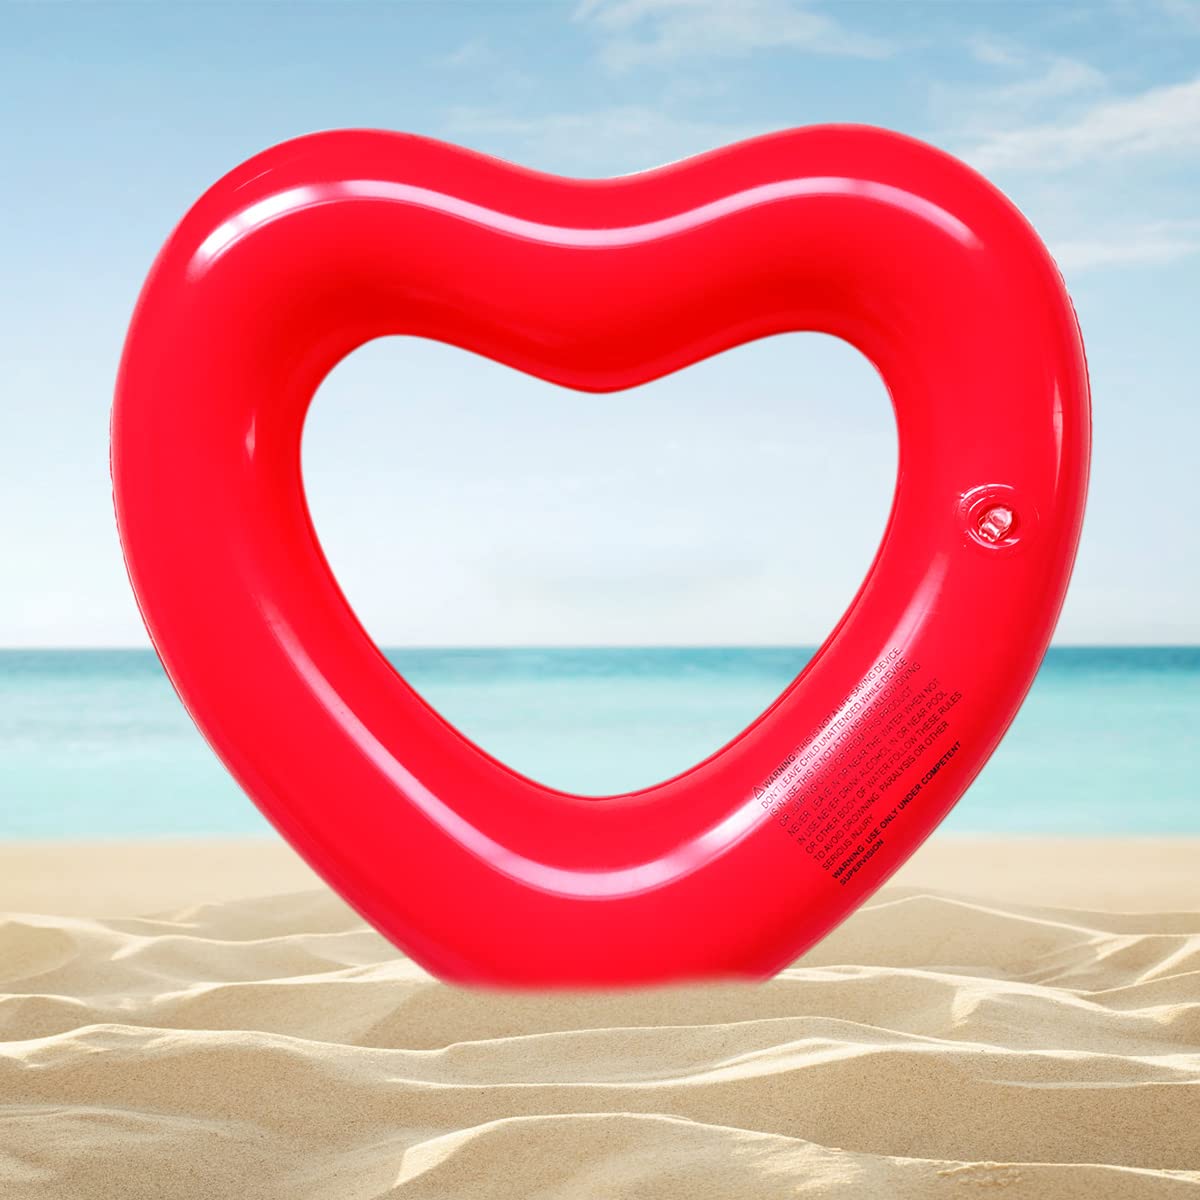 SUNSHINE-MALL Inflatable Swim Rings, Heart Shaped Swimming Pool Float Loungers Tube, Water Fun Beach Party Toys for Kids, Adults Small Red